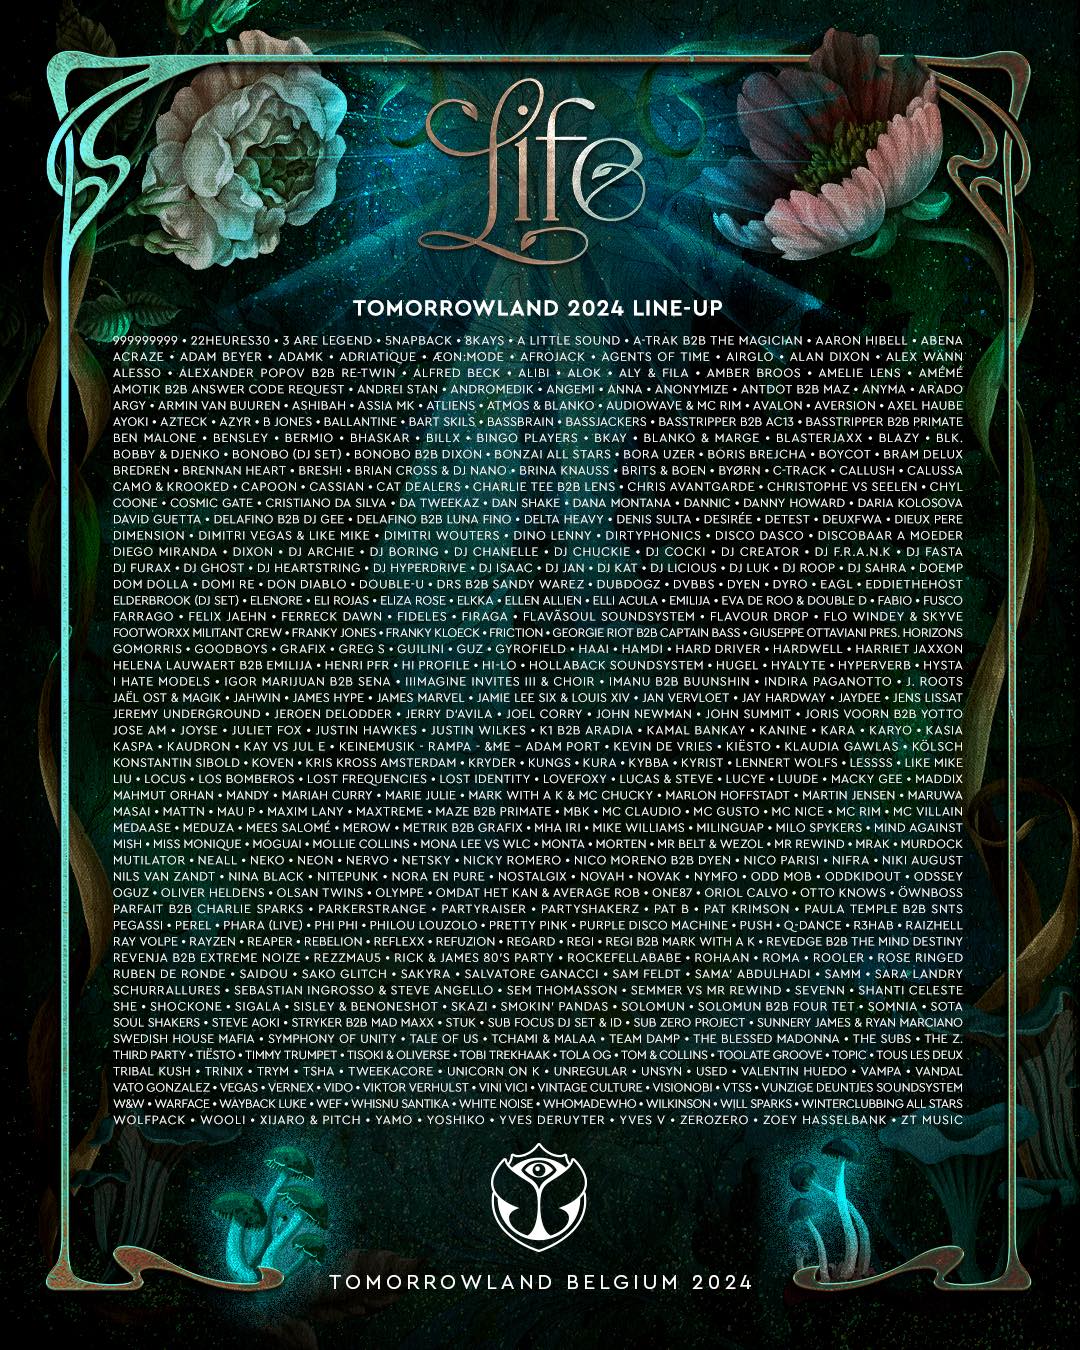 Tomorrowland Drops Massive Lineup for 2024 Edition That Festival Site